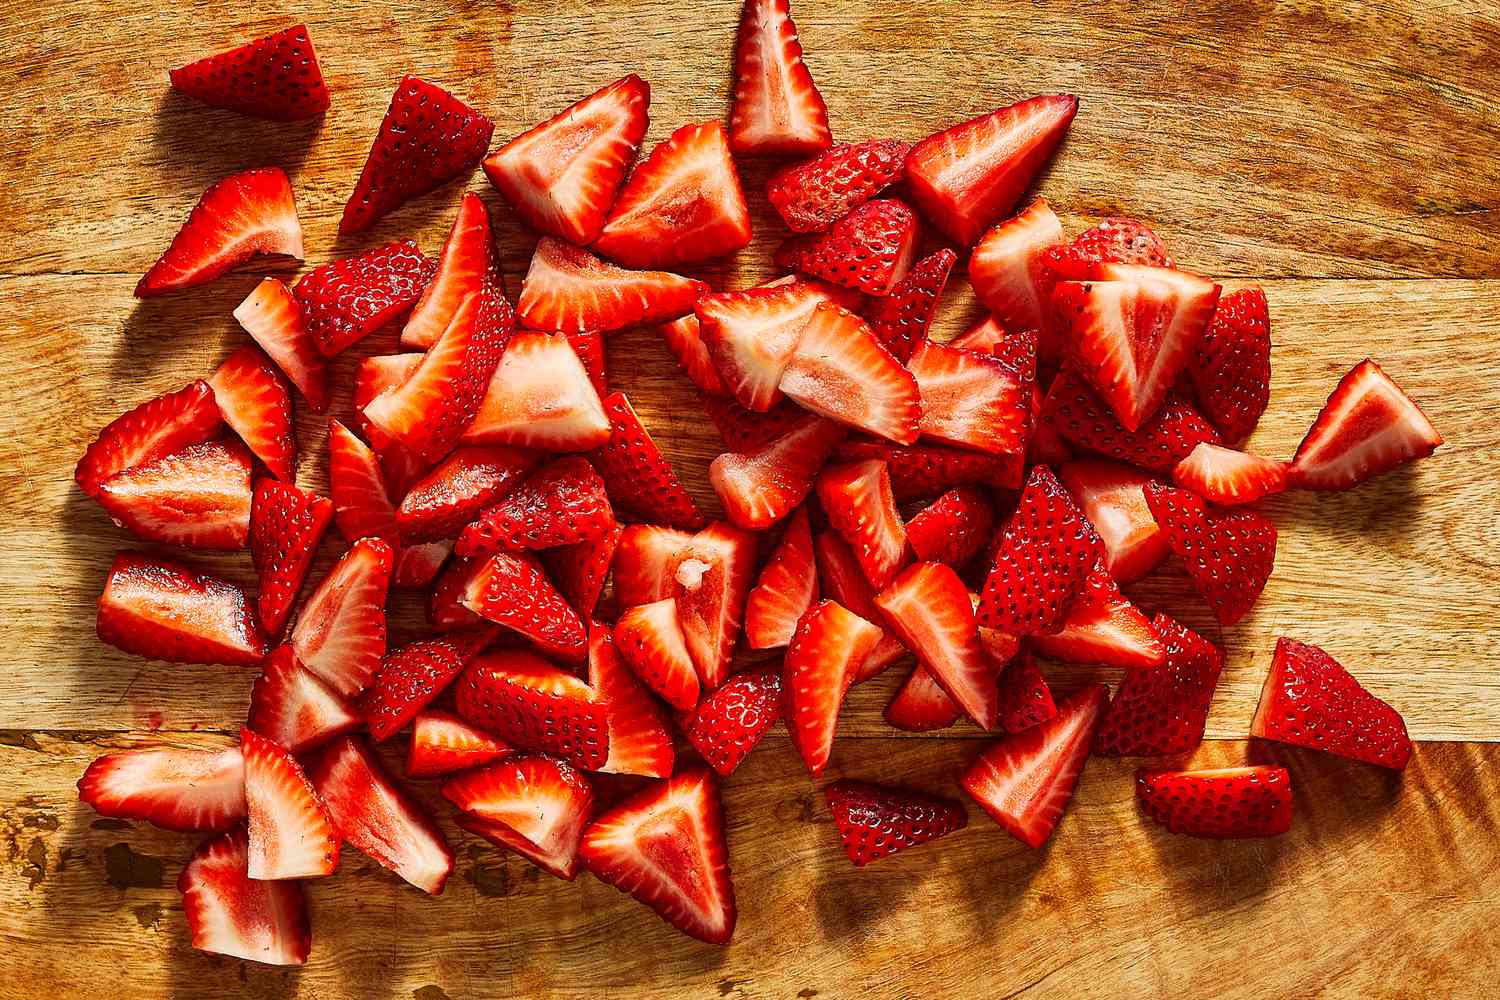 Slices of strawberries on a cutting board